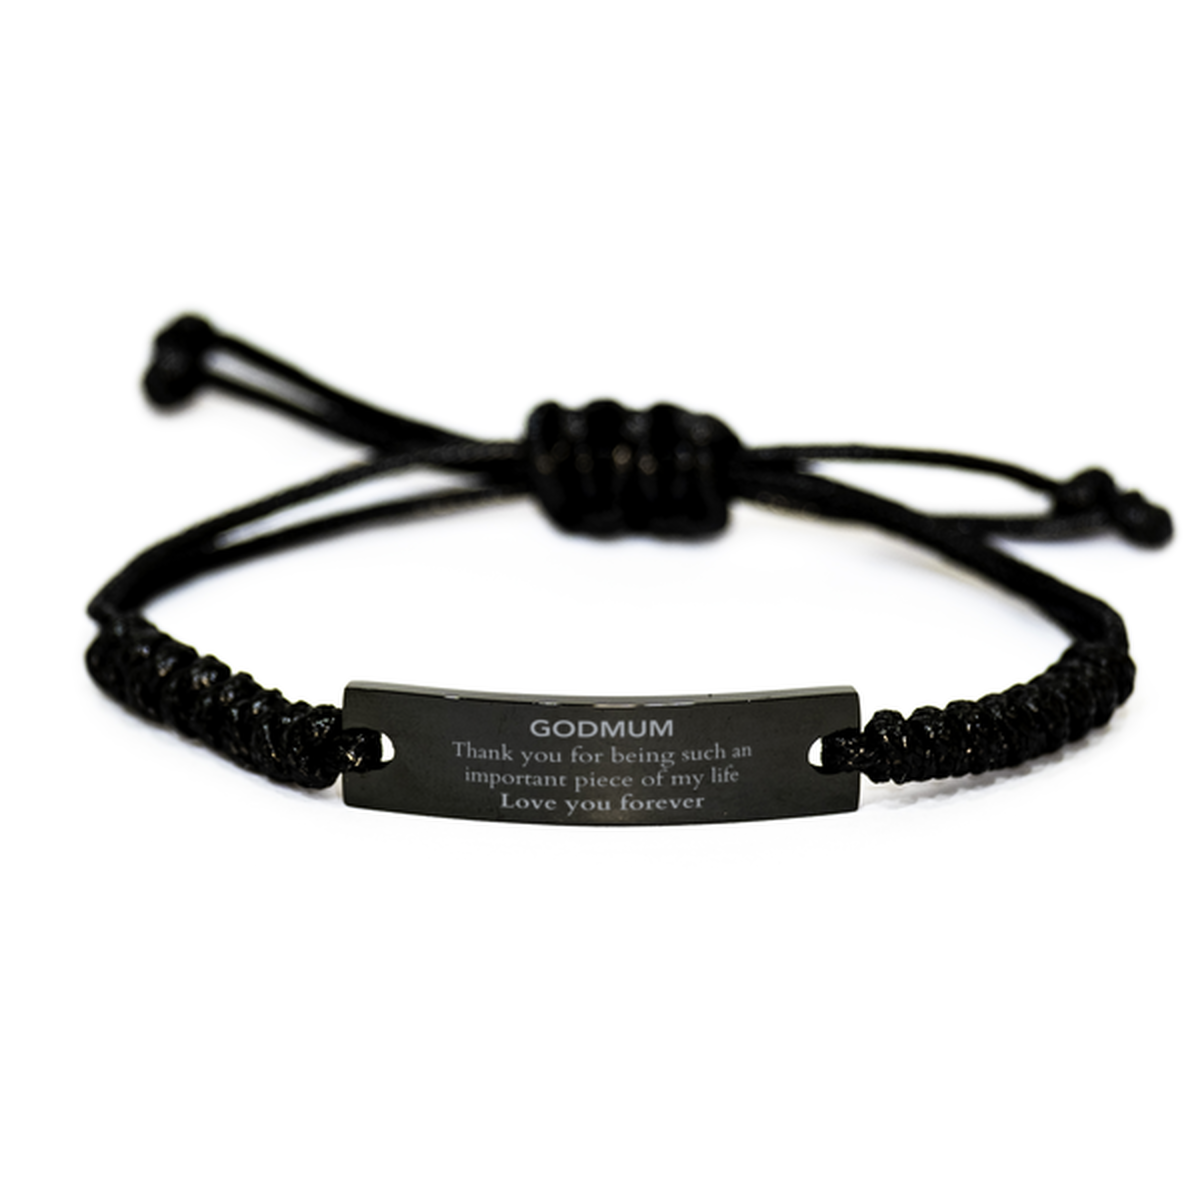 Appropriate Godmum Black Rope Bracelet Epic Birthday Gifts for Godmum Thank you for being such an important piece of my life Godmum Christmas Mothers Fathers Day